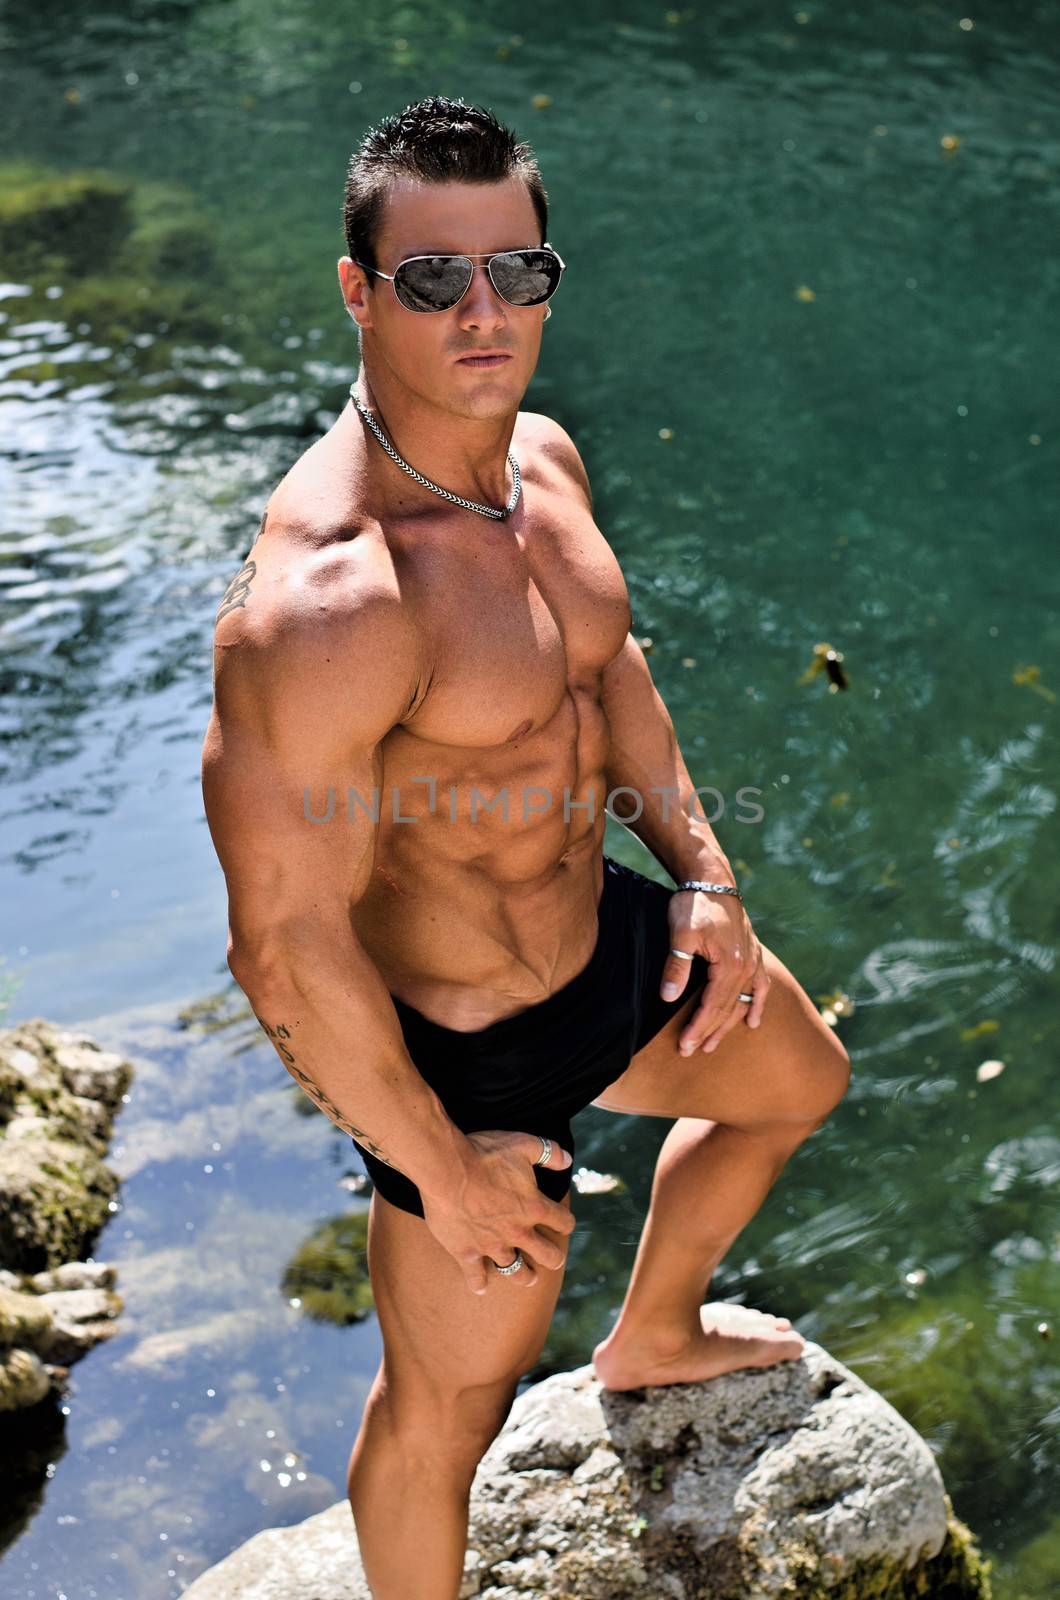 Handsome young muscle man standing in water pond shirtless with sunglasses